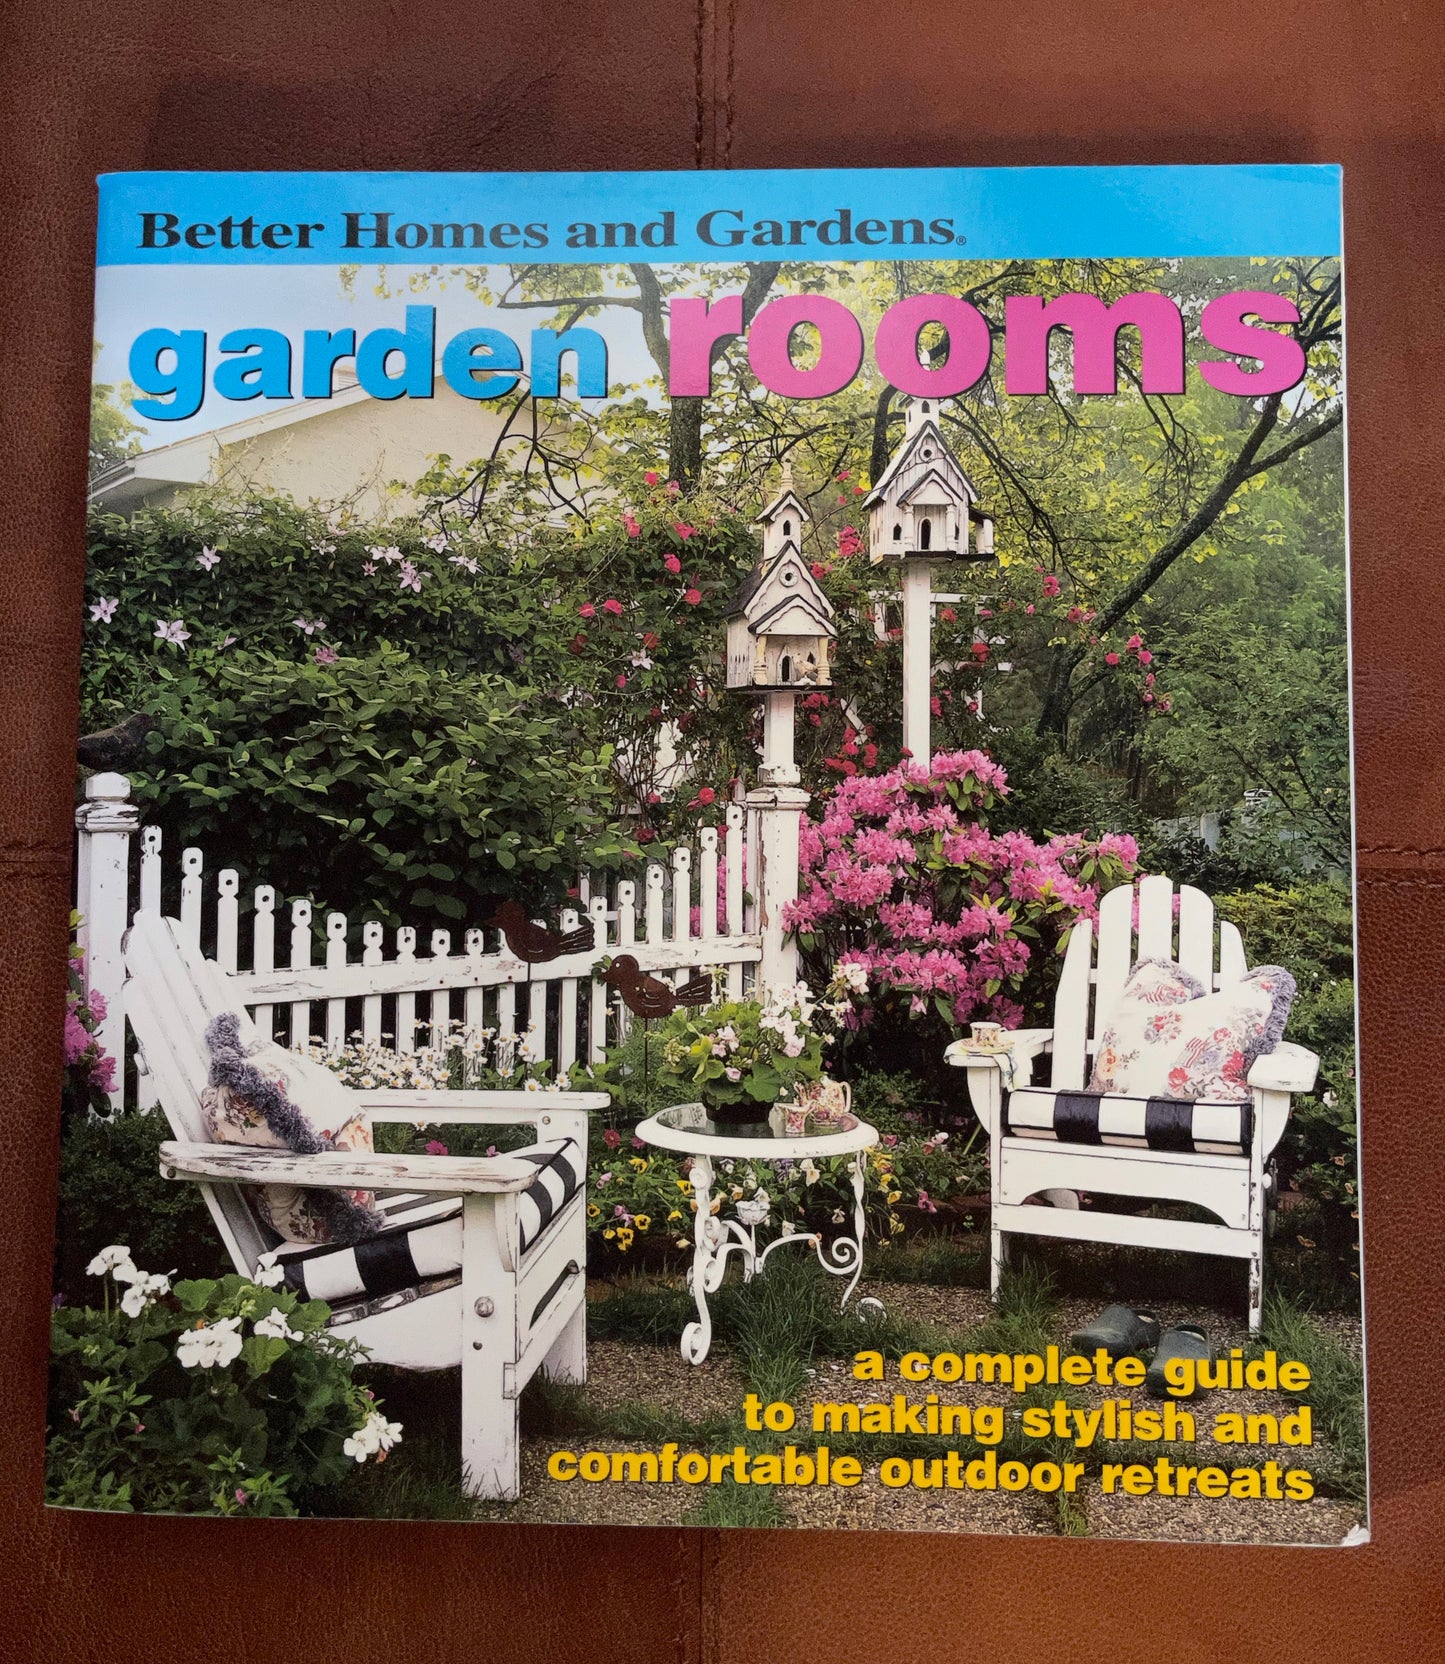 Better Homes And Gardens Garden Rooms, Bodhi Books and Magazines